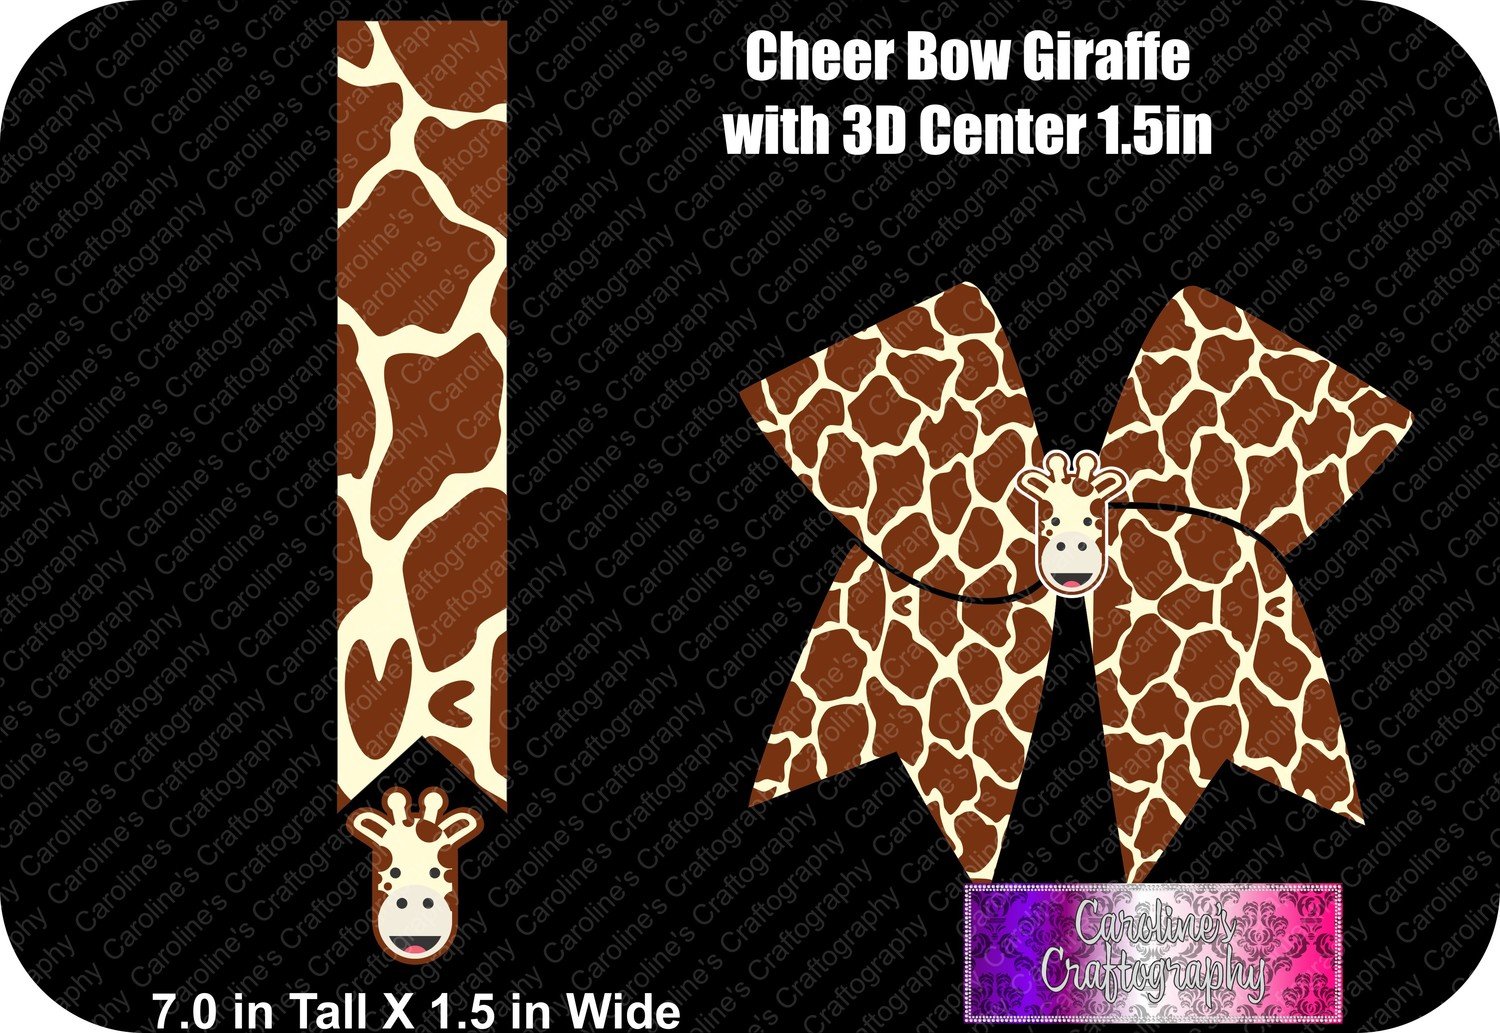 Giraffe 1.5in with 3D Center Cheer Bow